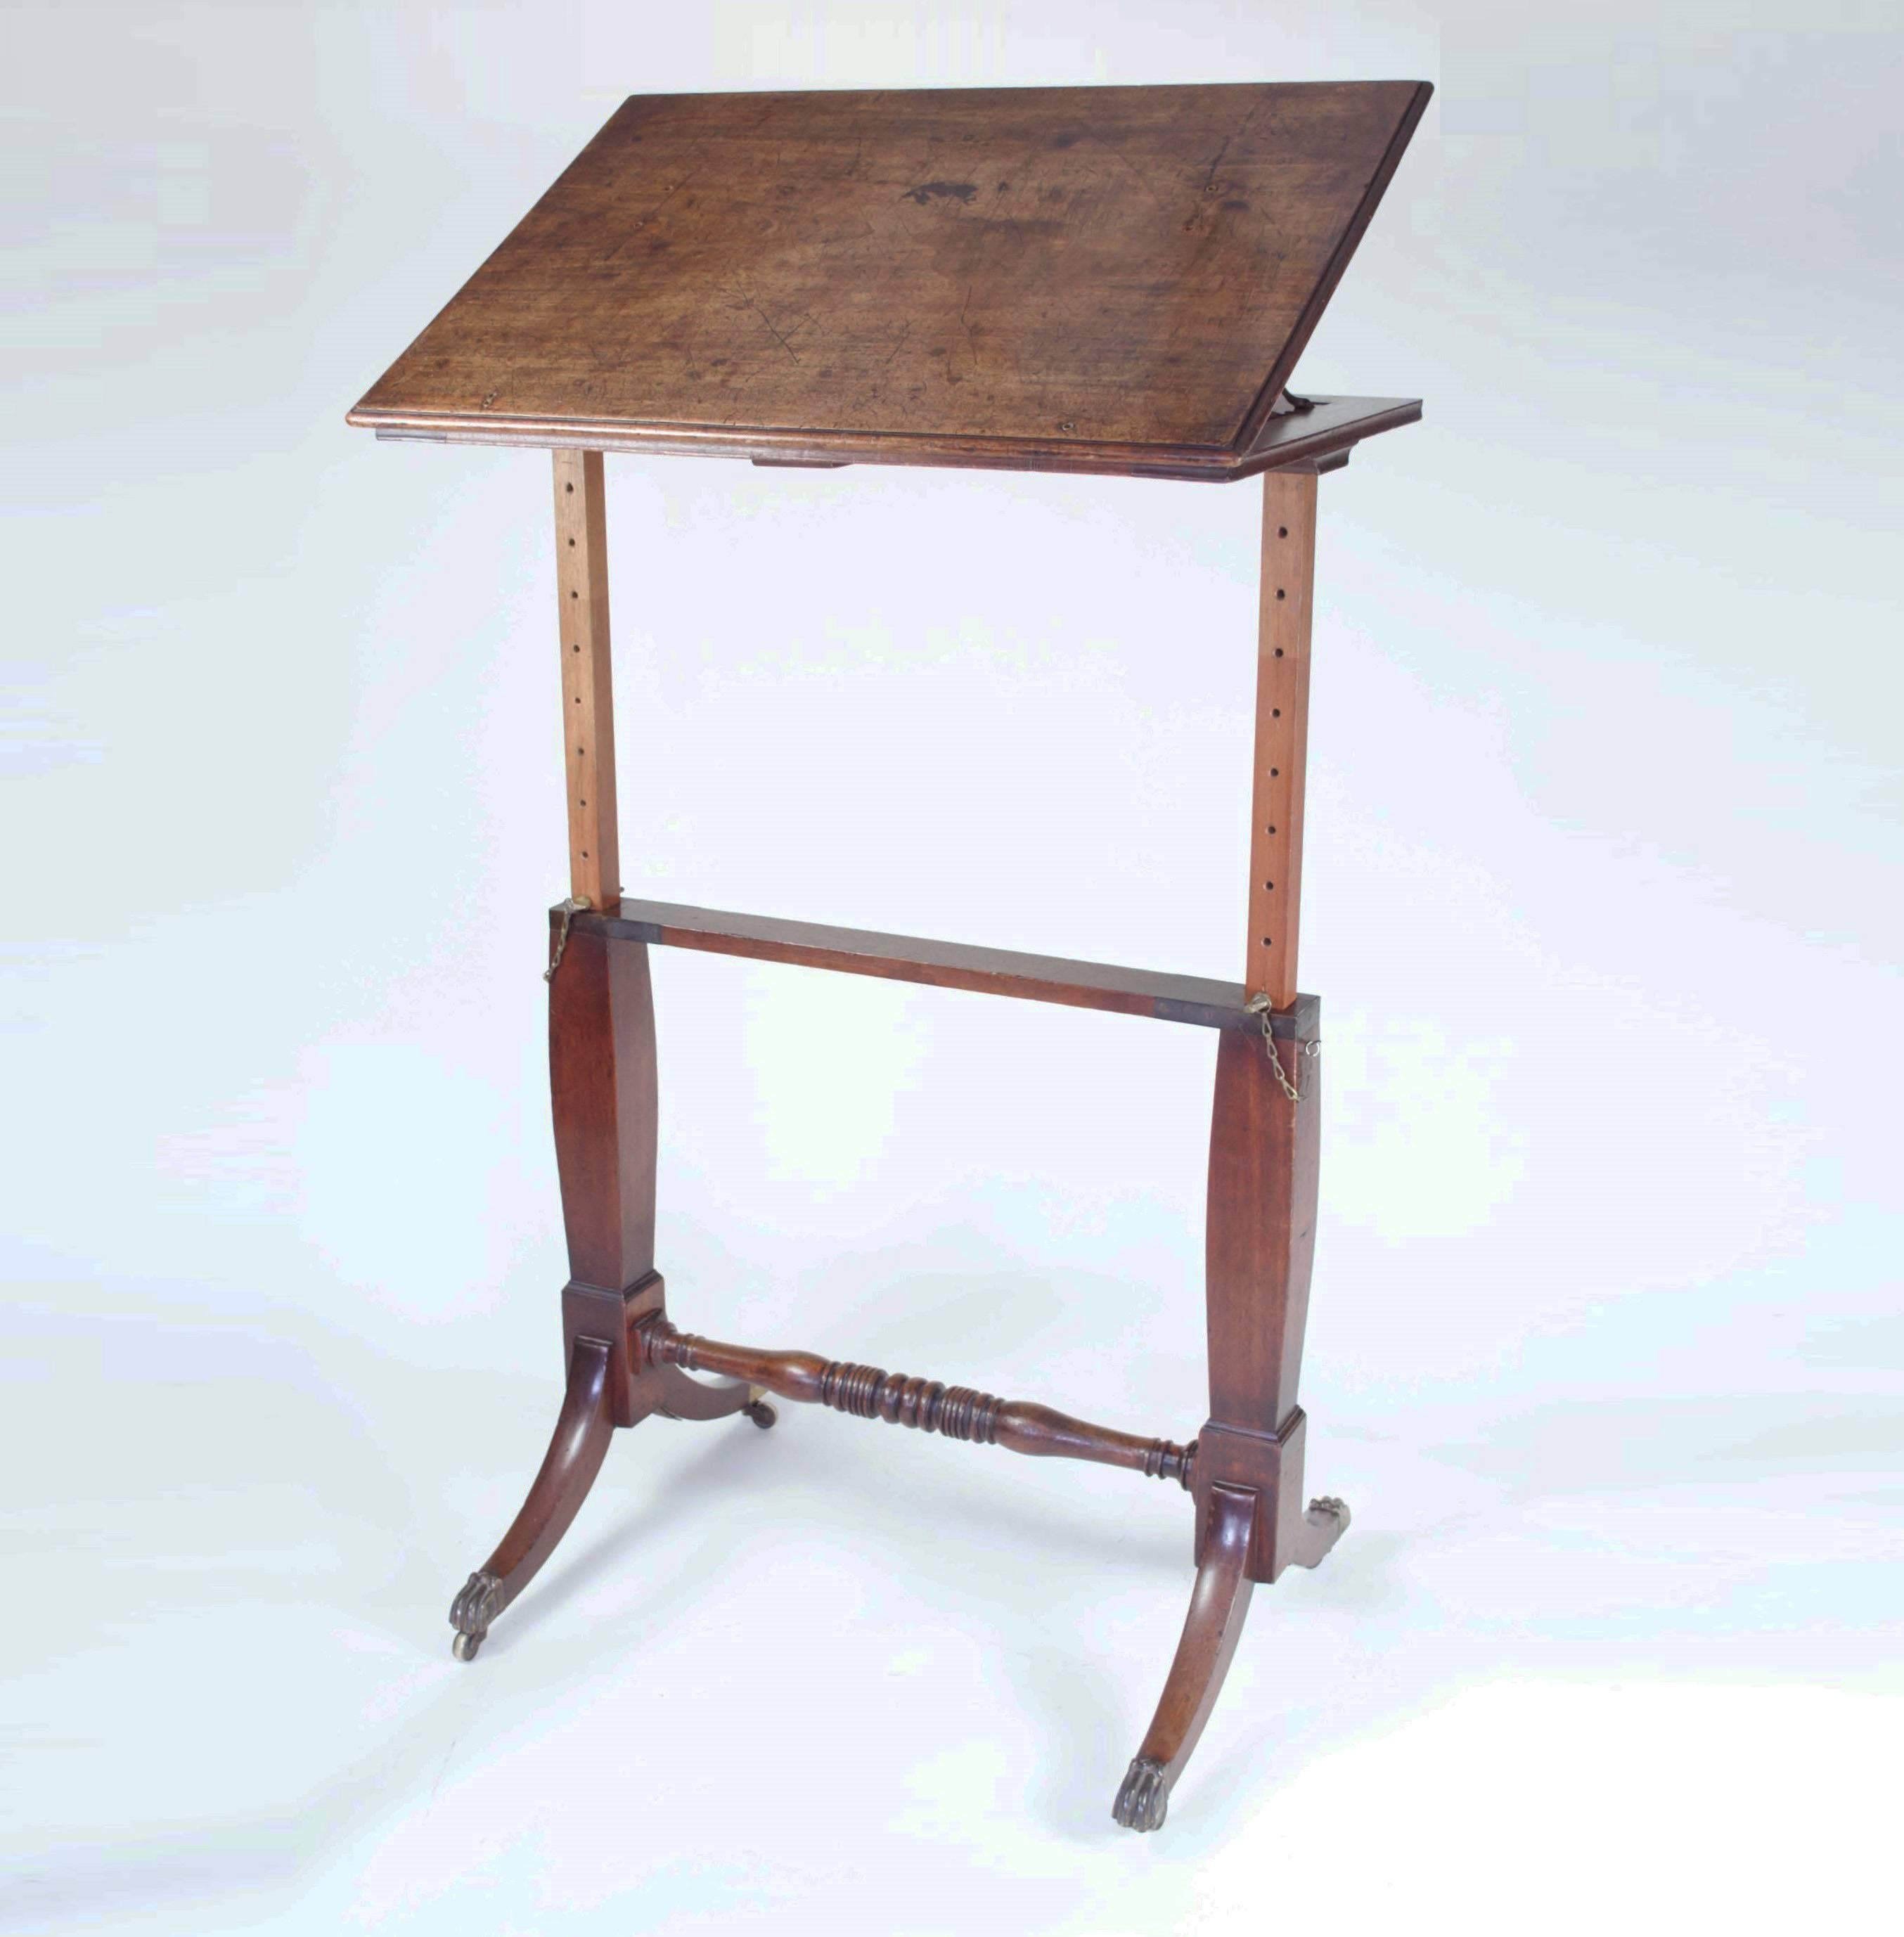 An unusual early 19th century adjustable artist's table, reading stand or lecturn with ratcheted top raised on end supports allowing several differing heights between 76cms and 127cms and resting on swept legs ending in brass animal paw caps and